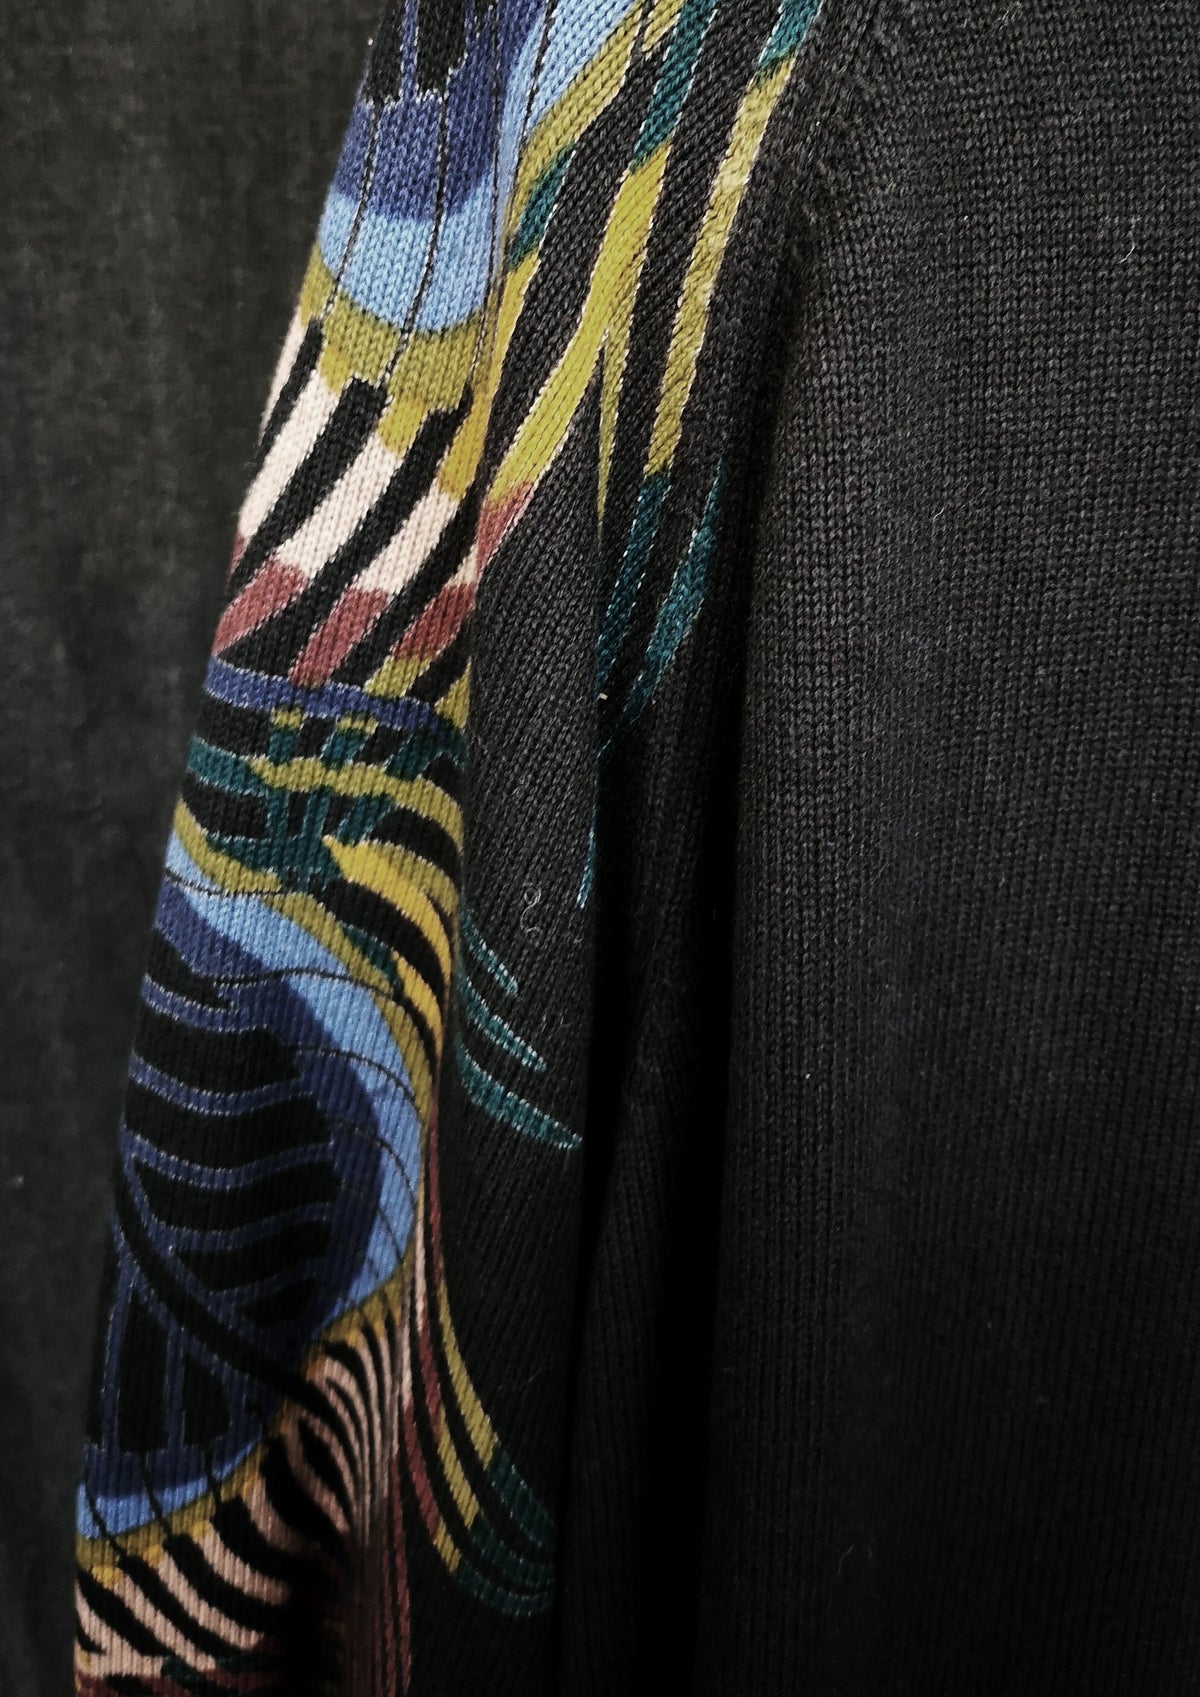 SWEATER OVERSIZED - KNIT PEACOCK color print by BERENIK